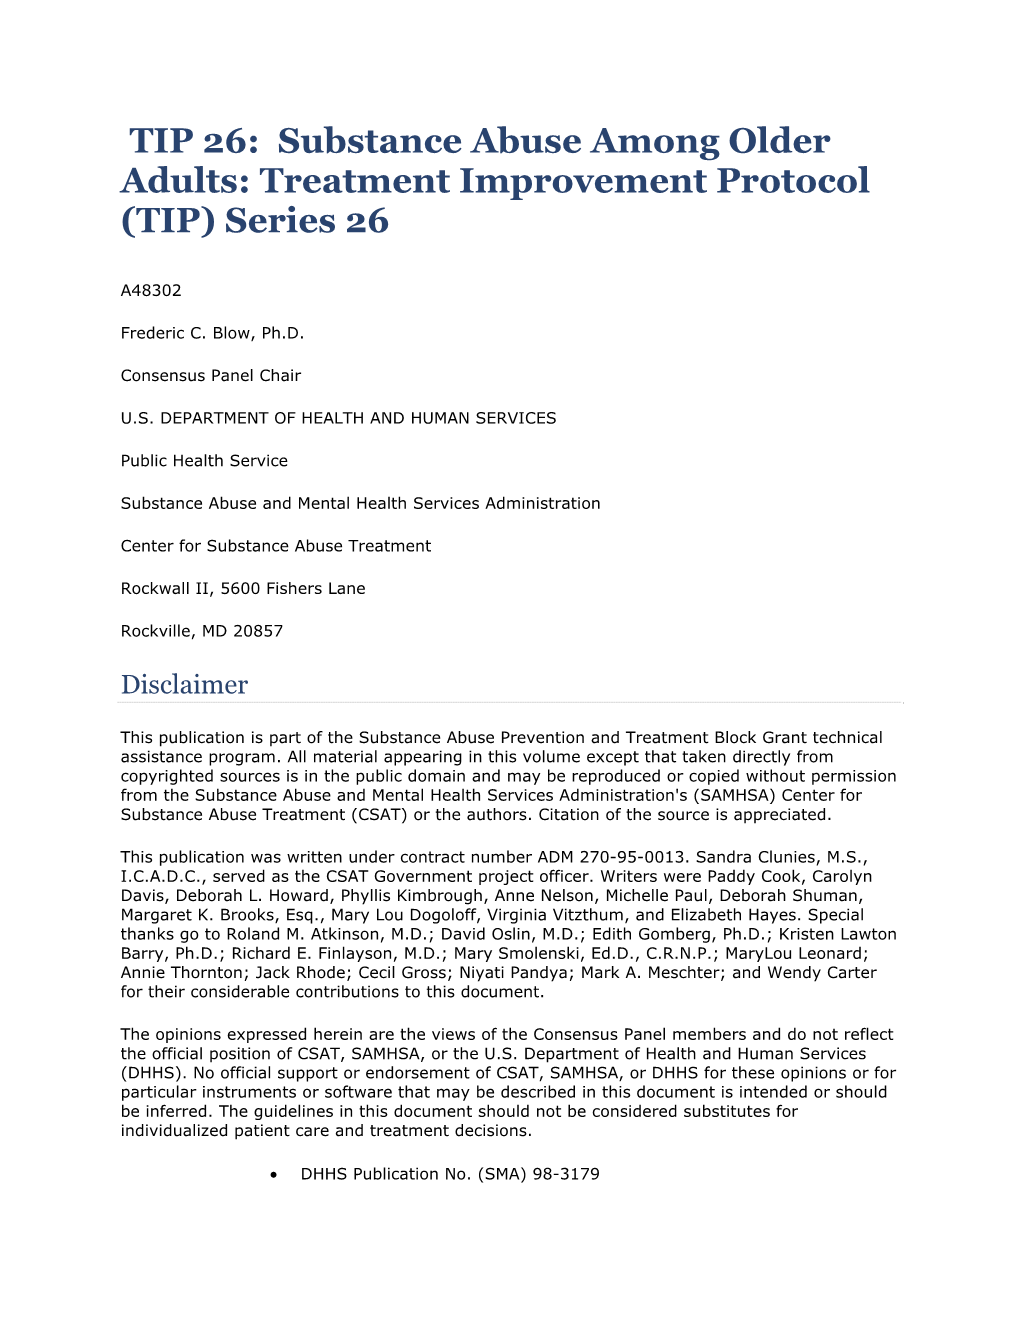 Substance Abuse Among Older Adults: Treatment Improvement Protocol (TIP) Series 26